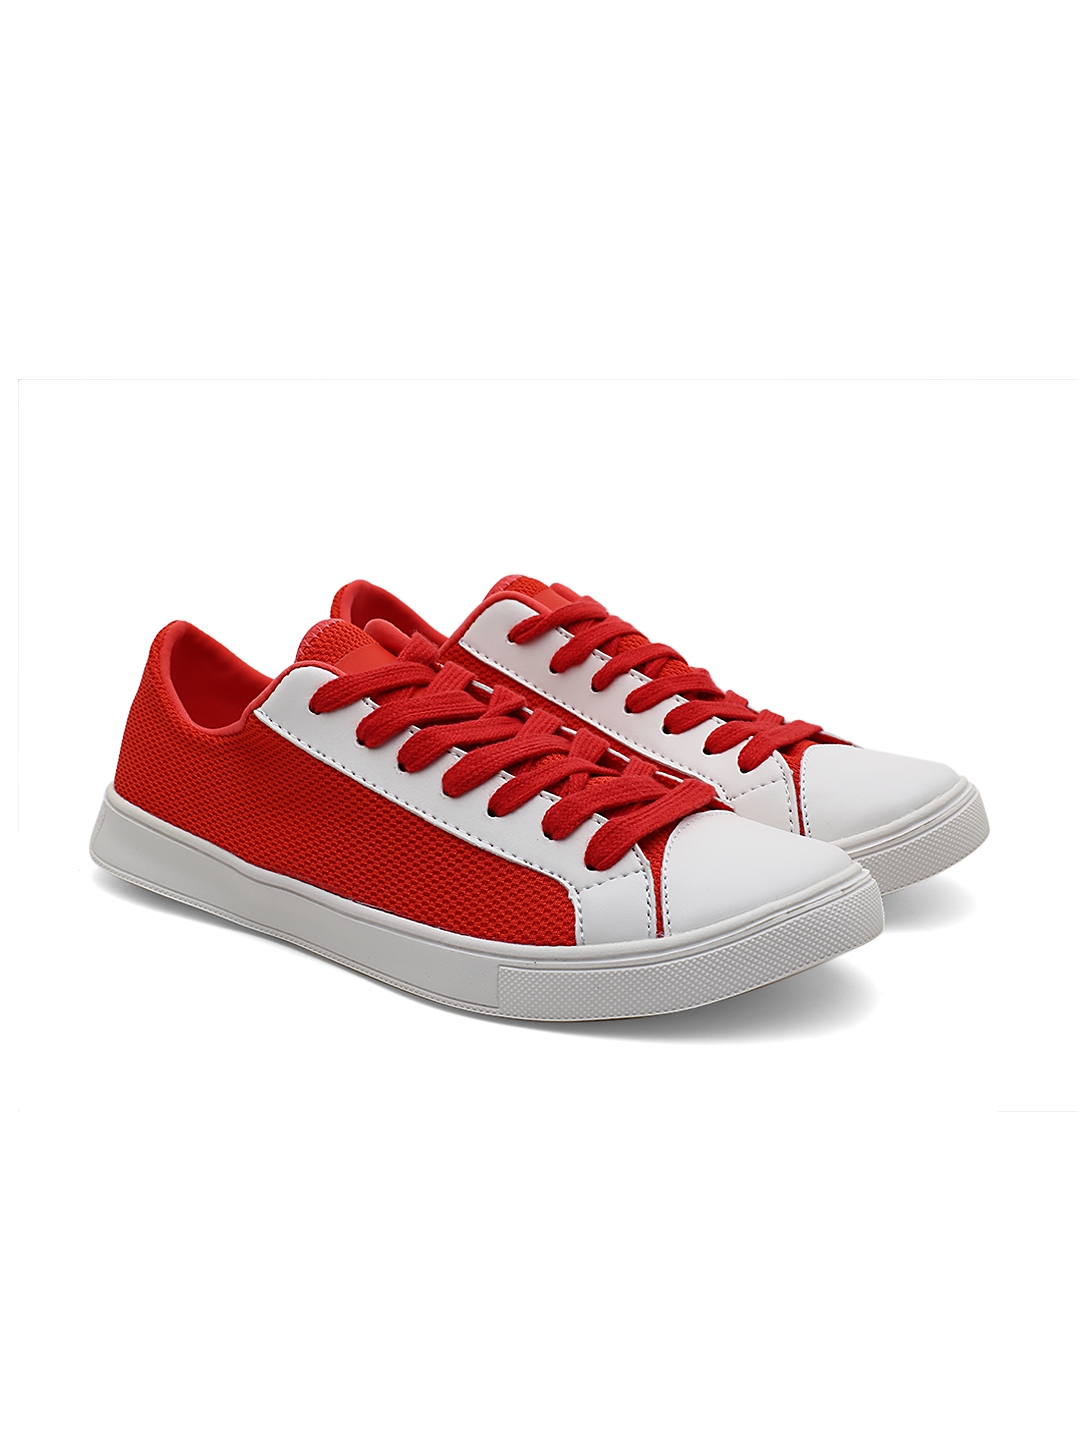 Red Sneakers - Casual Shoes for Men 